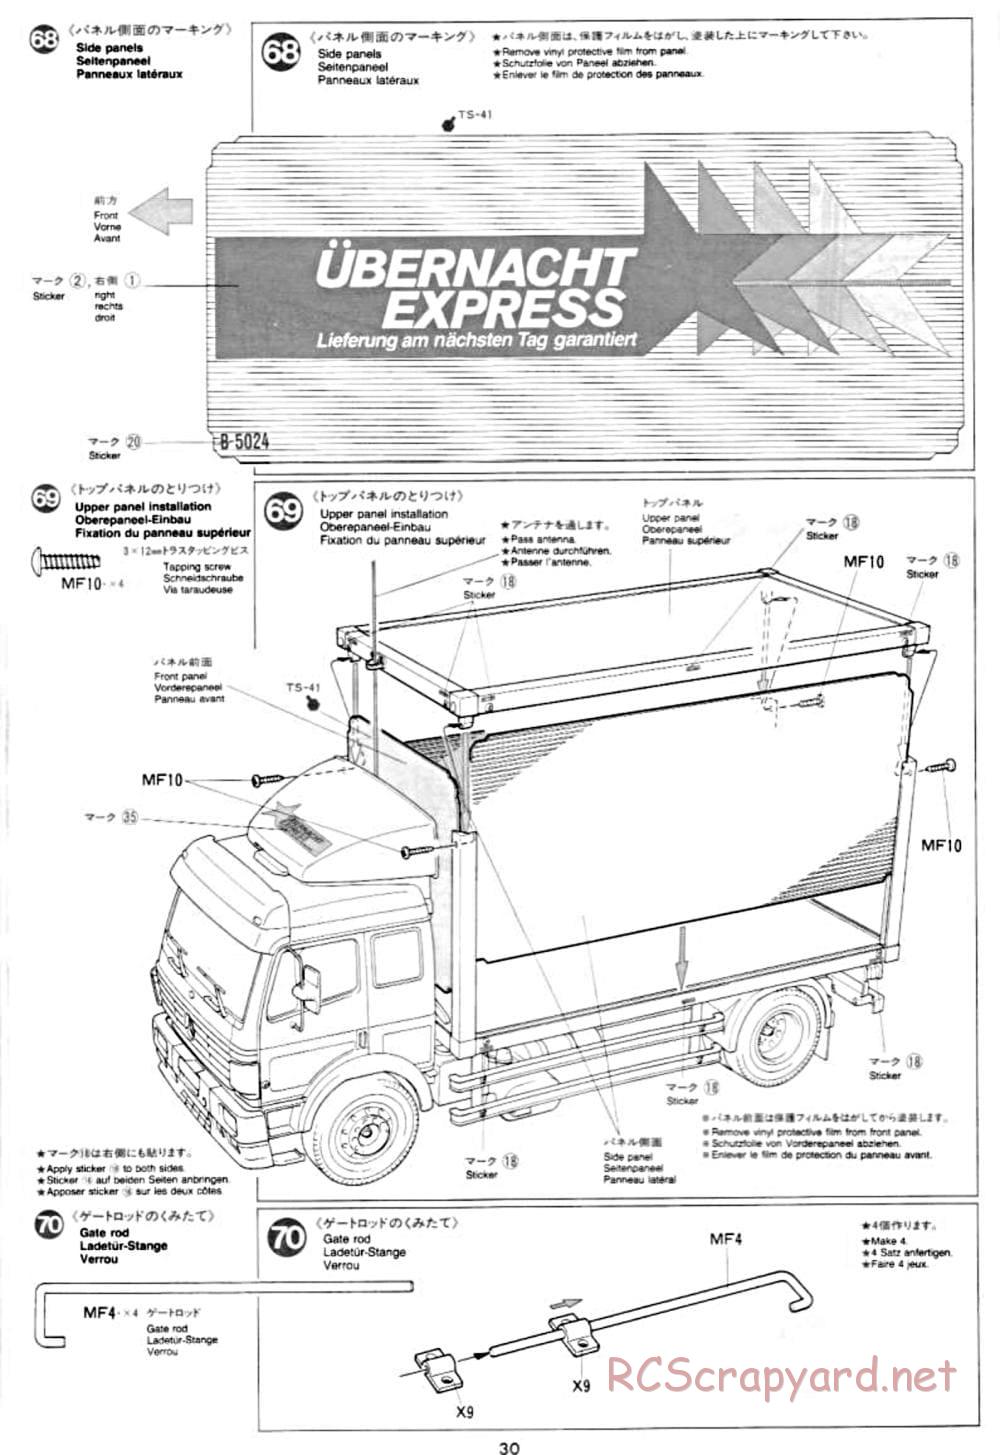 Tamiya - Mercedes-Benz 1850L Delivery Truck - Manual - Page 30